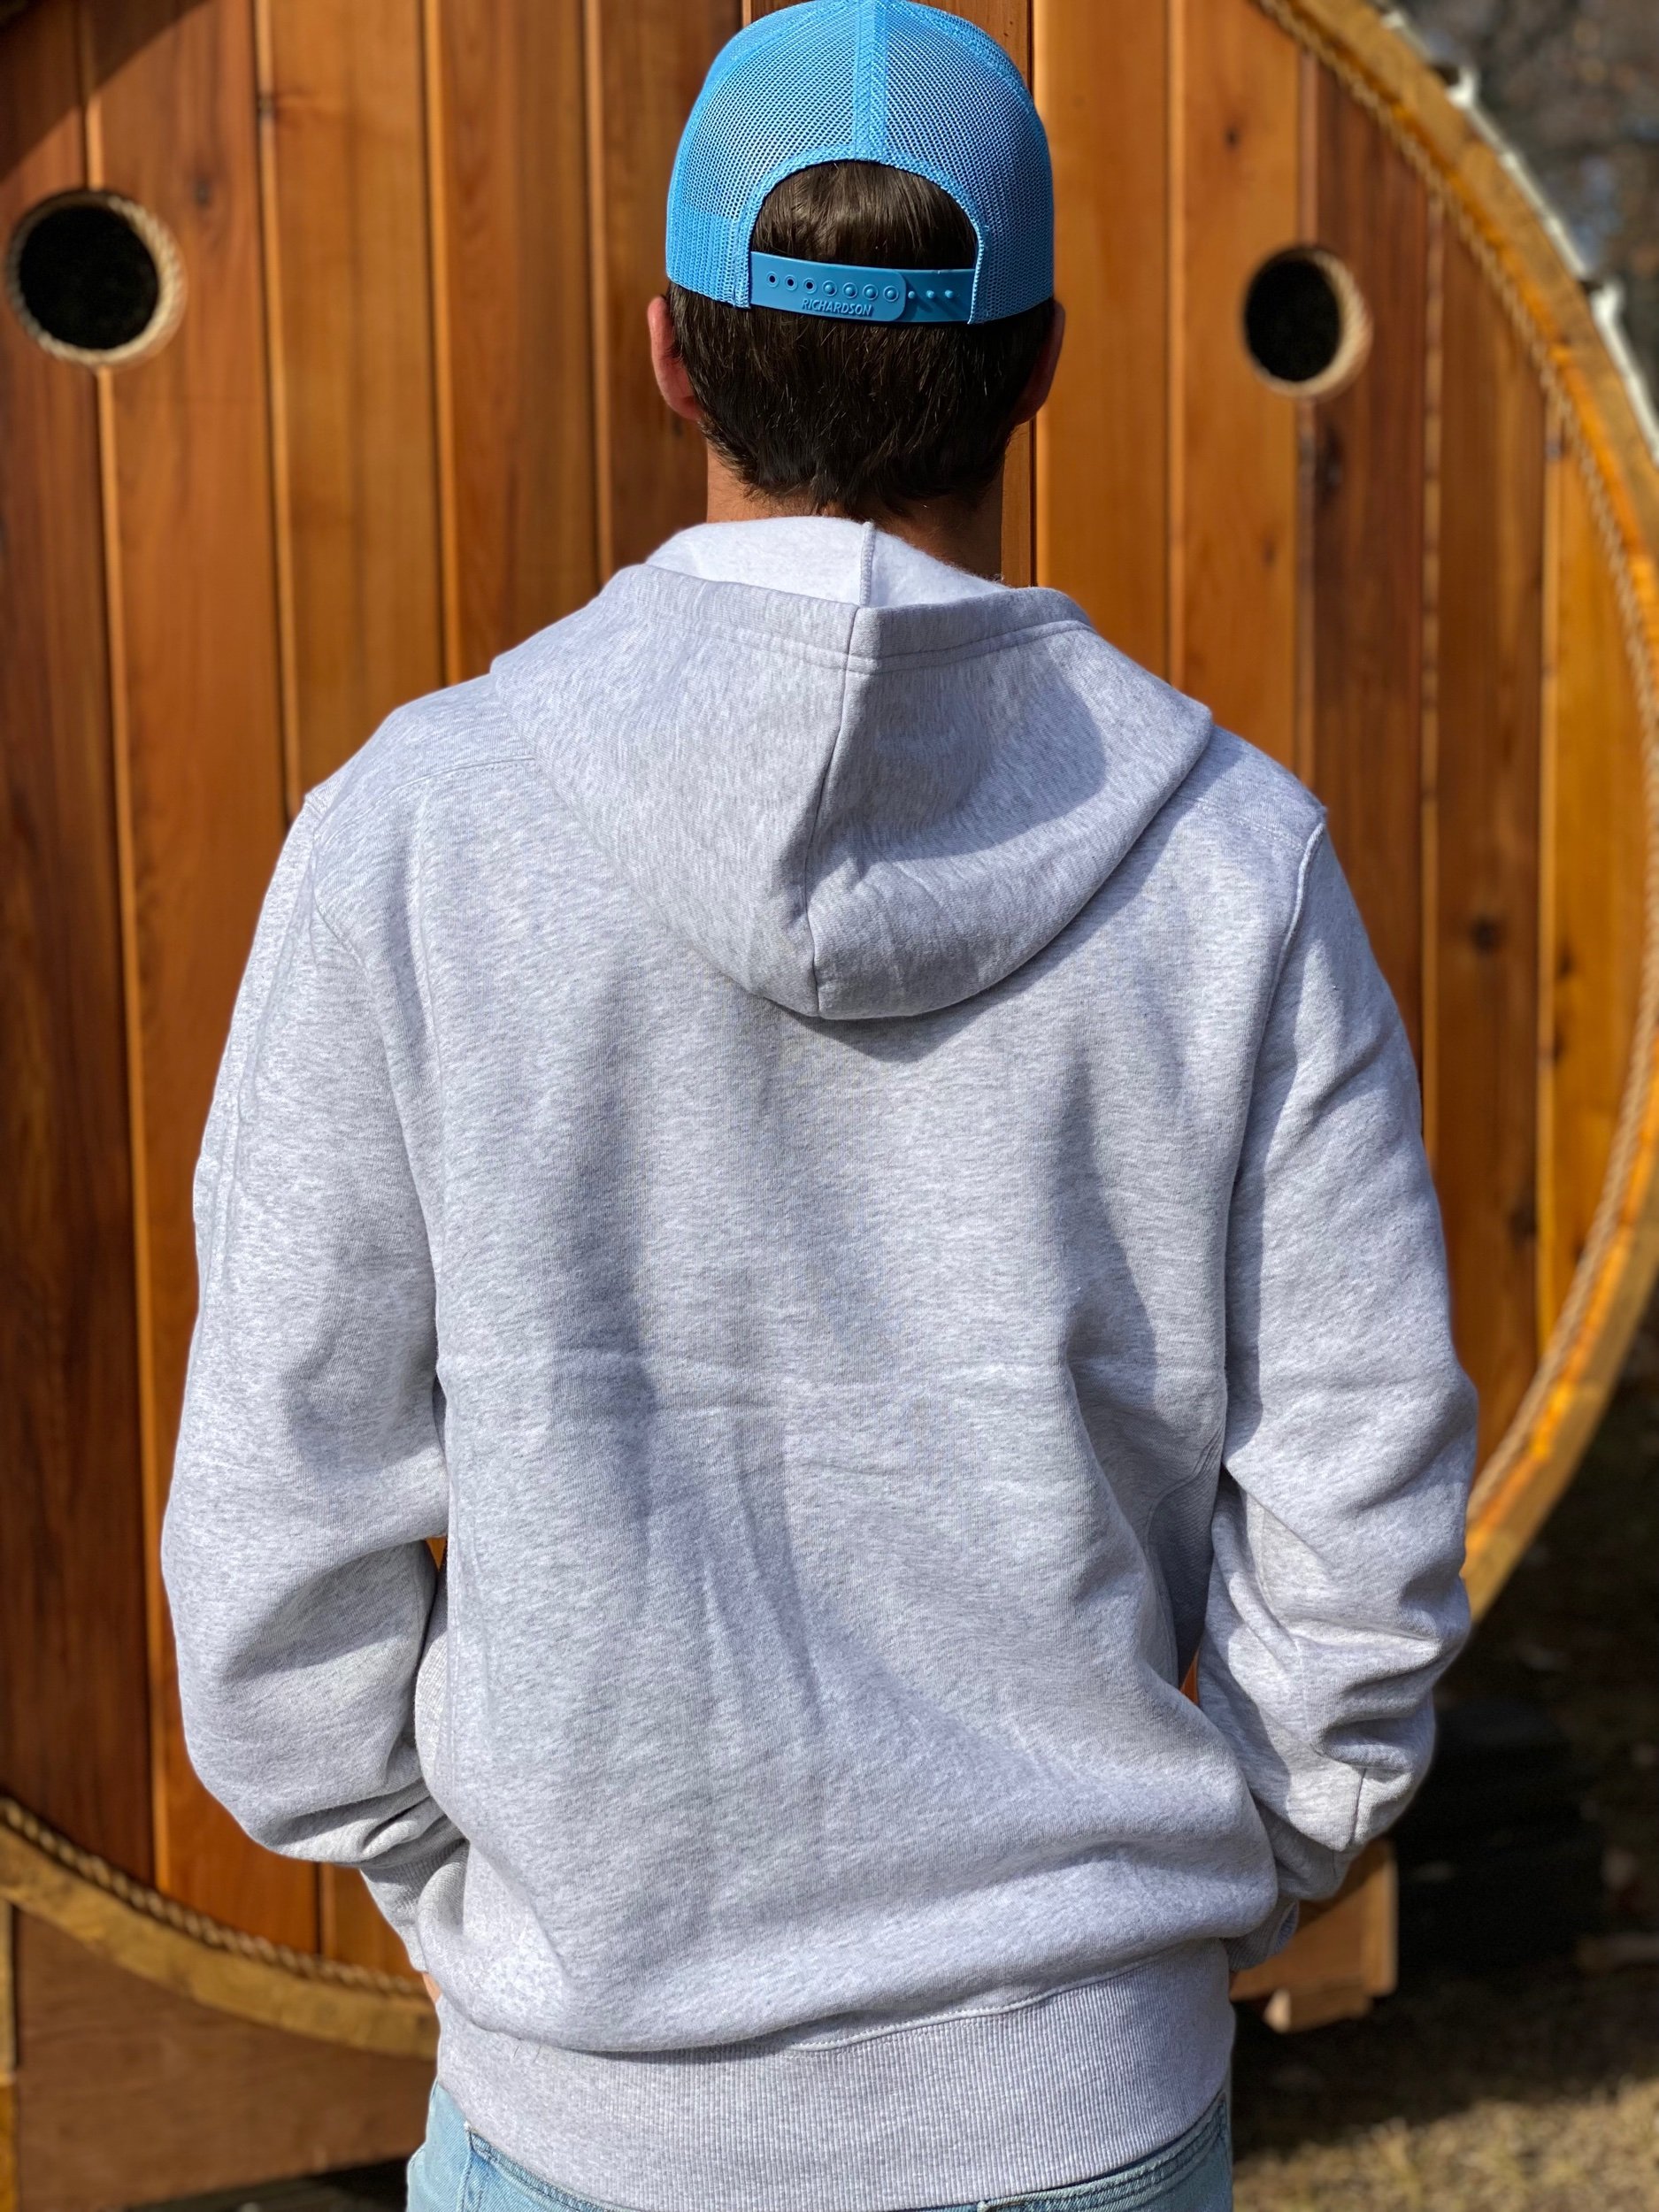 Pond hockey hooded sweatshirt with laces